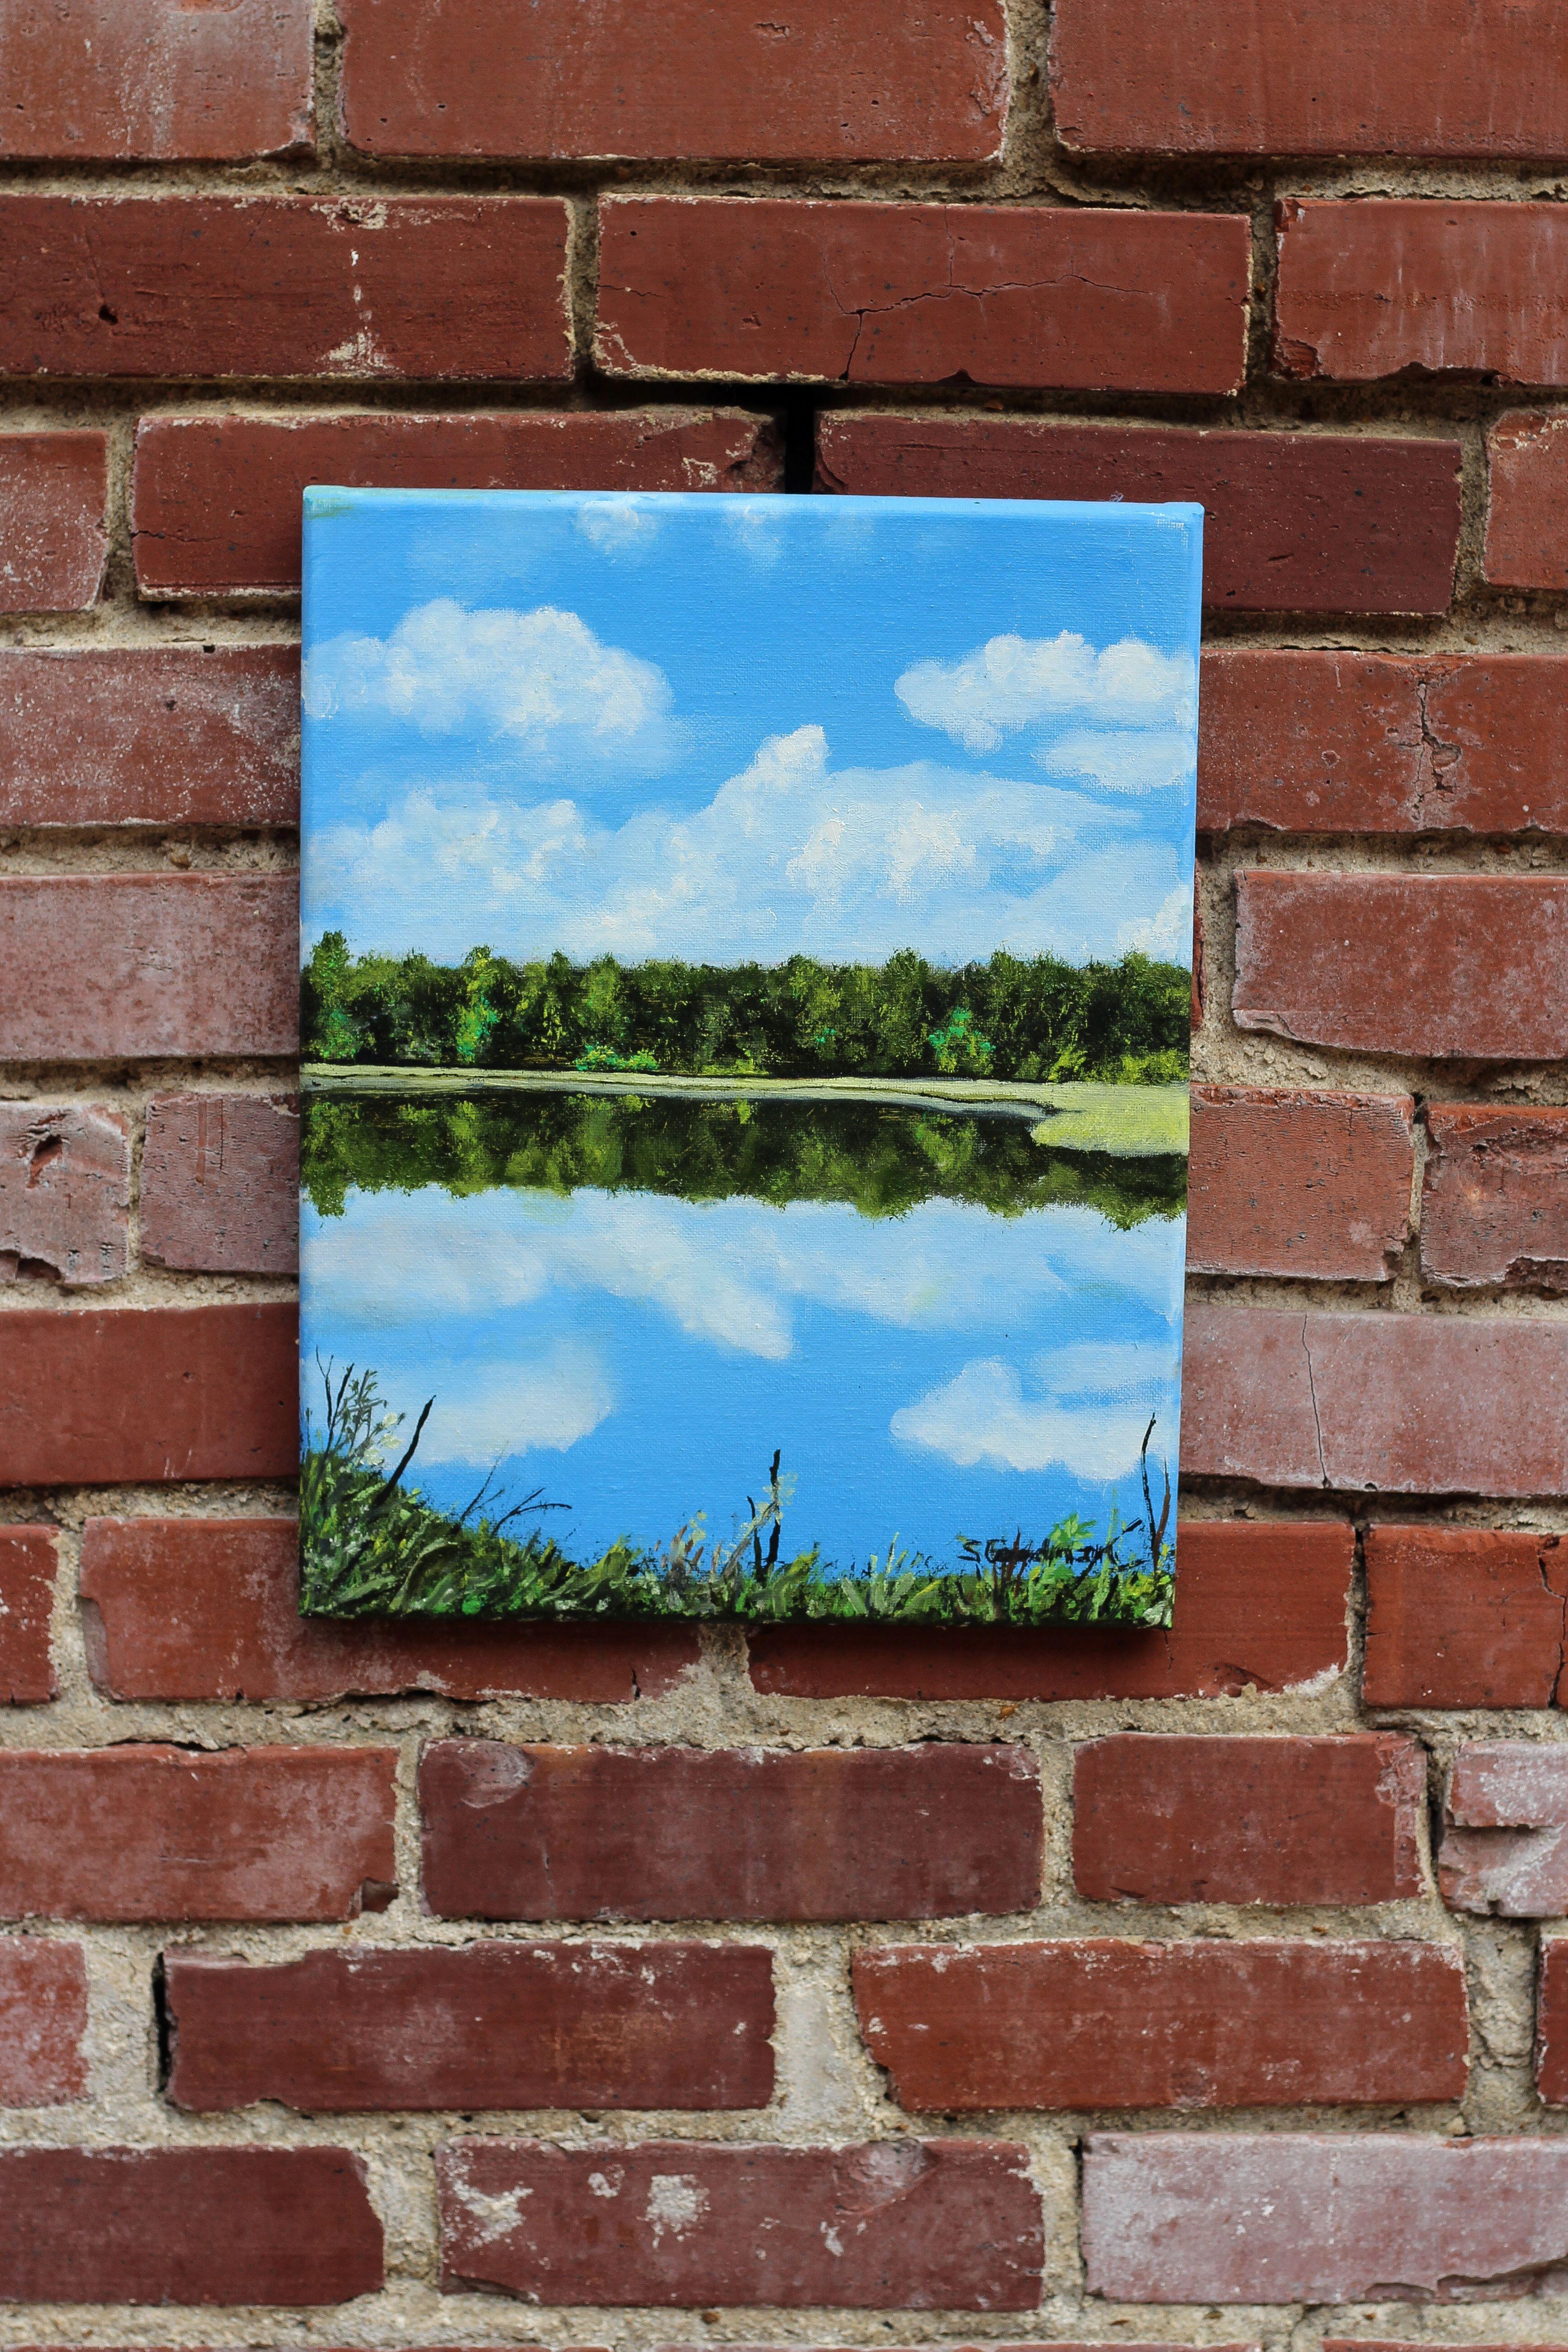 <p>Artist Comments<br>Artist Shela Goodman presents a tranquil view of a river brimming with lush vegetation. Clouds and trees line up and reflect in the water in front, while the foliage defines the bottom of the scene. Shela skillfully balances